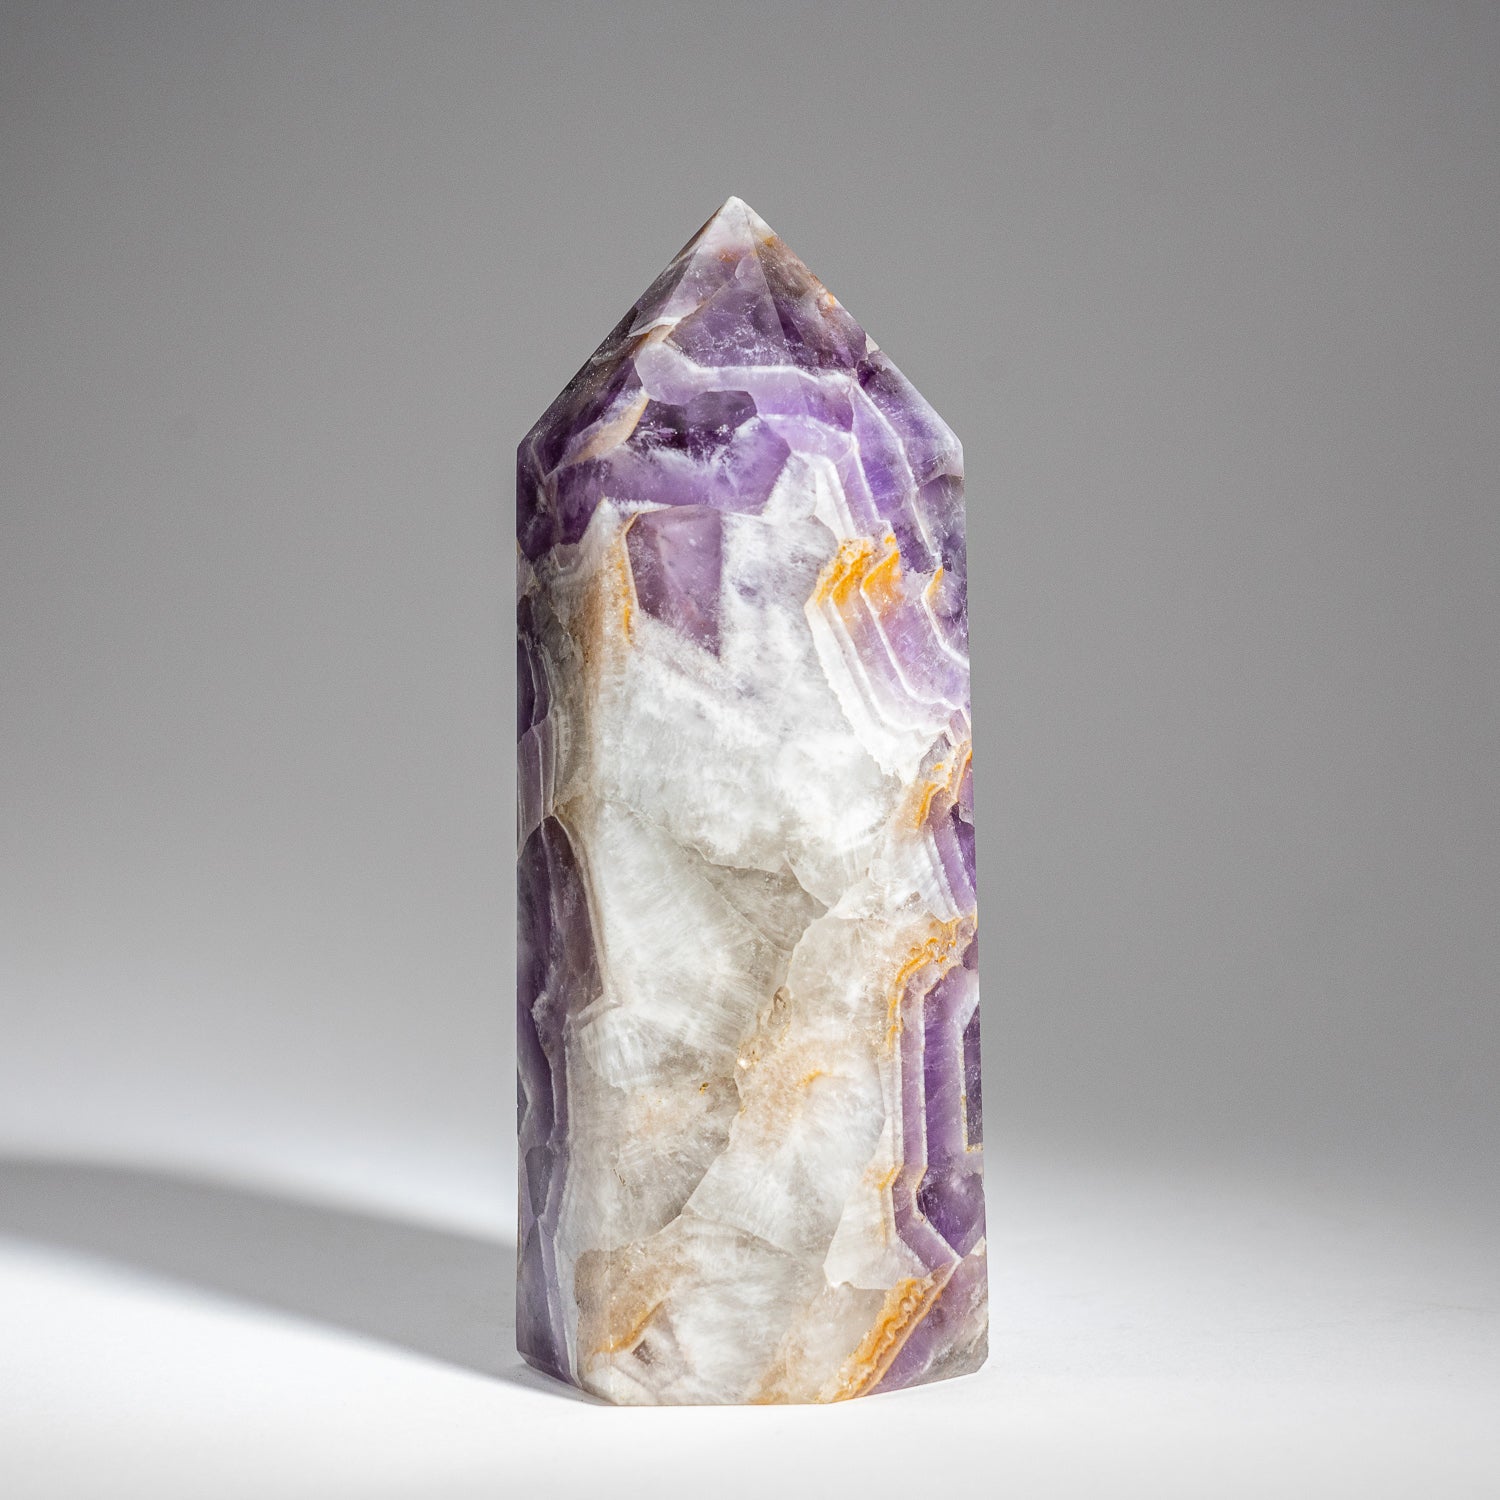 Polished Amethyst Crystal Point From Brazil (2.5 lbs)